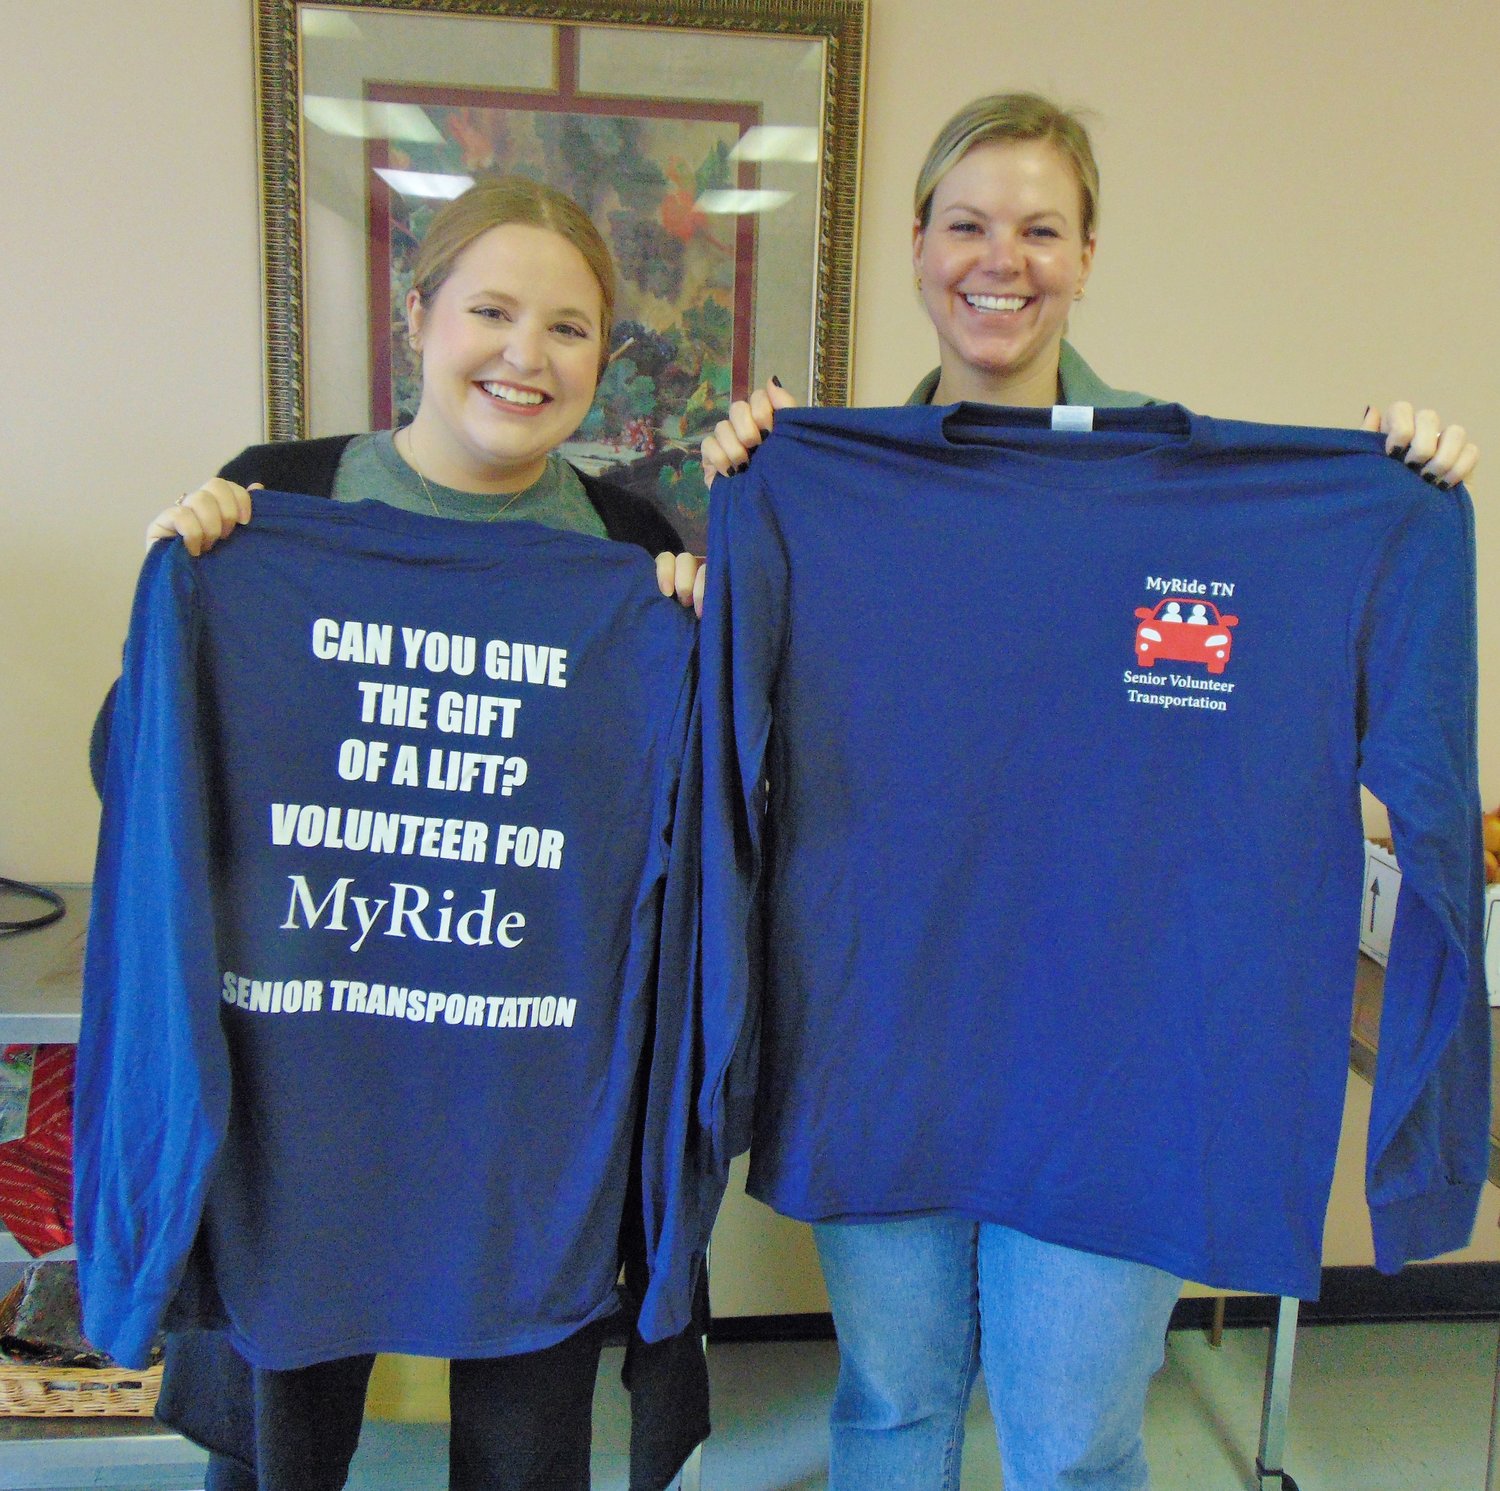 Ella Watkins and Sutherland Shrader from the First Lady Maria Lee’s office hold up MyRide TN shirts.